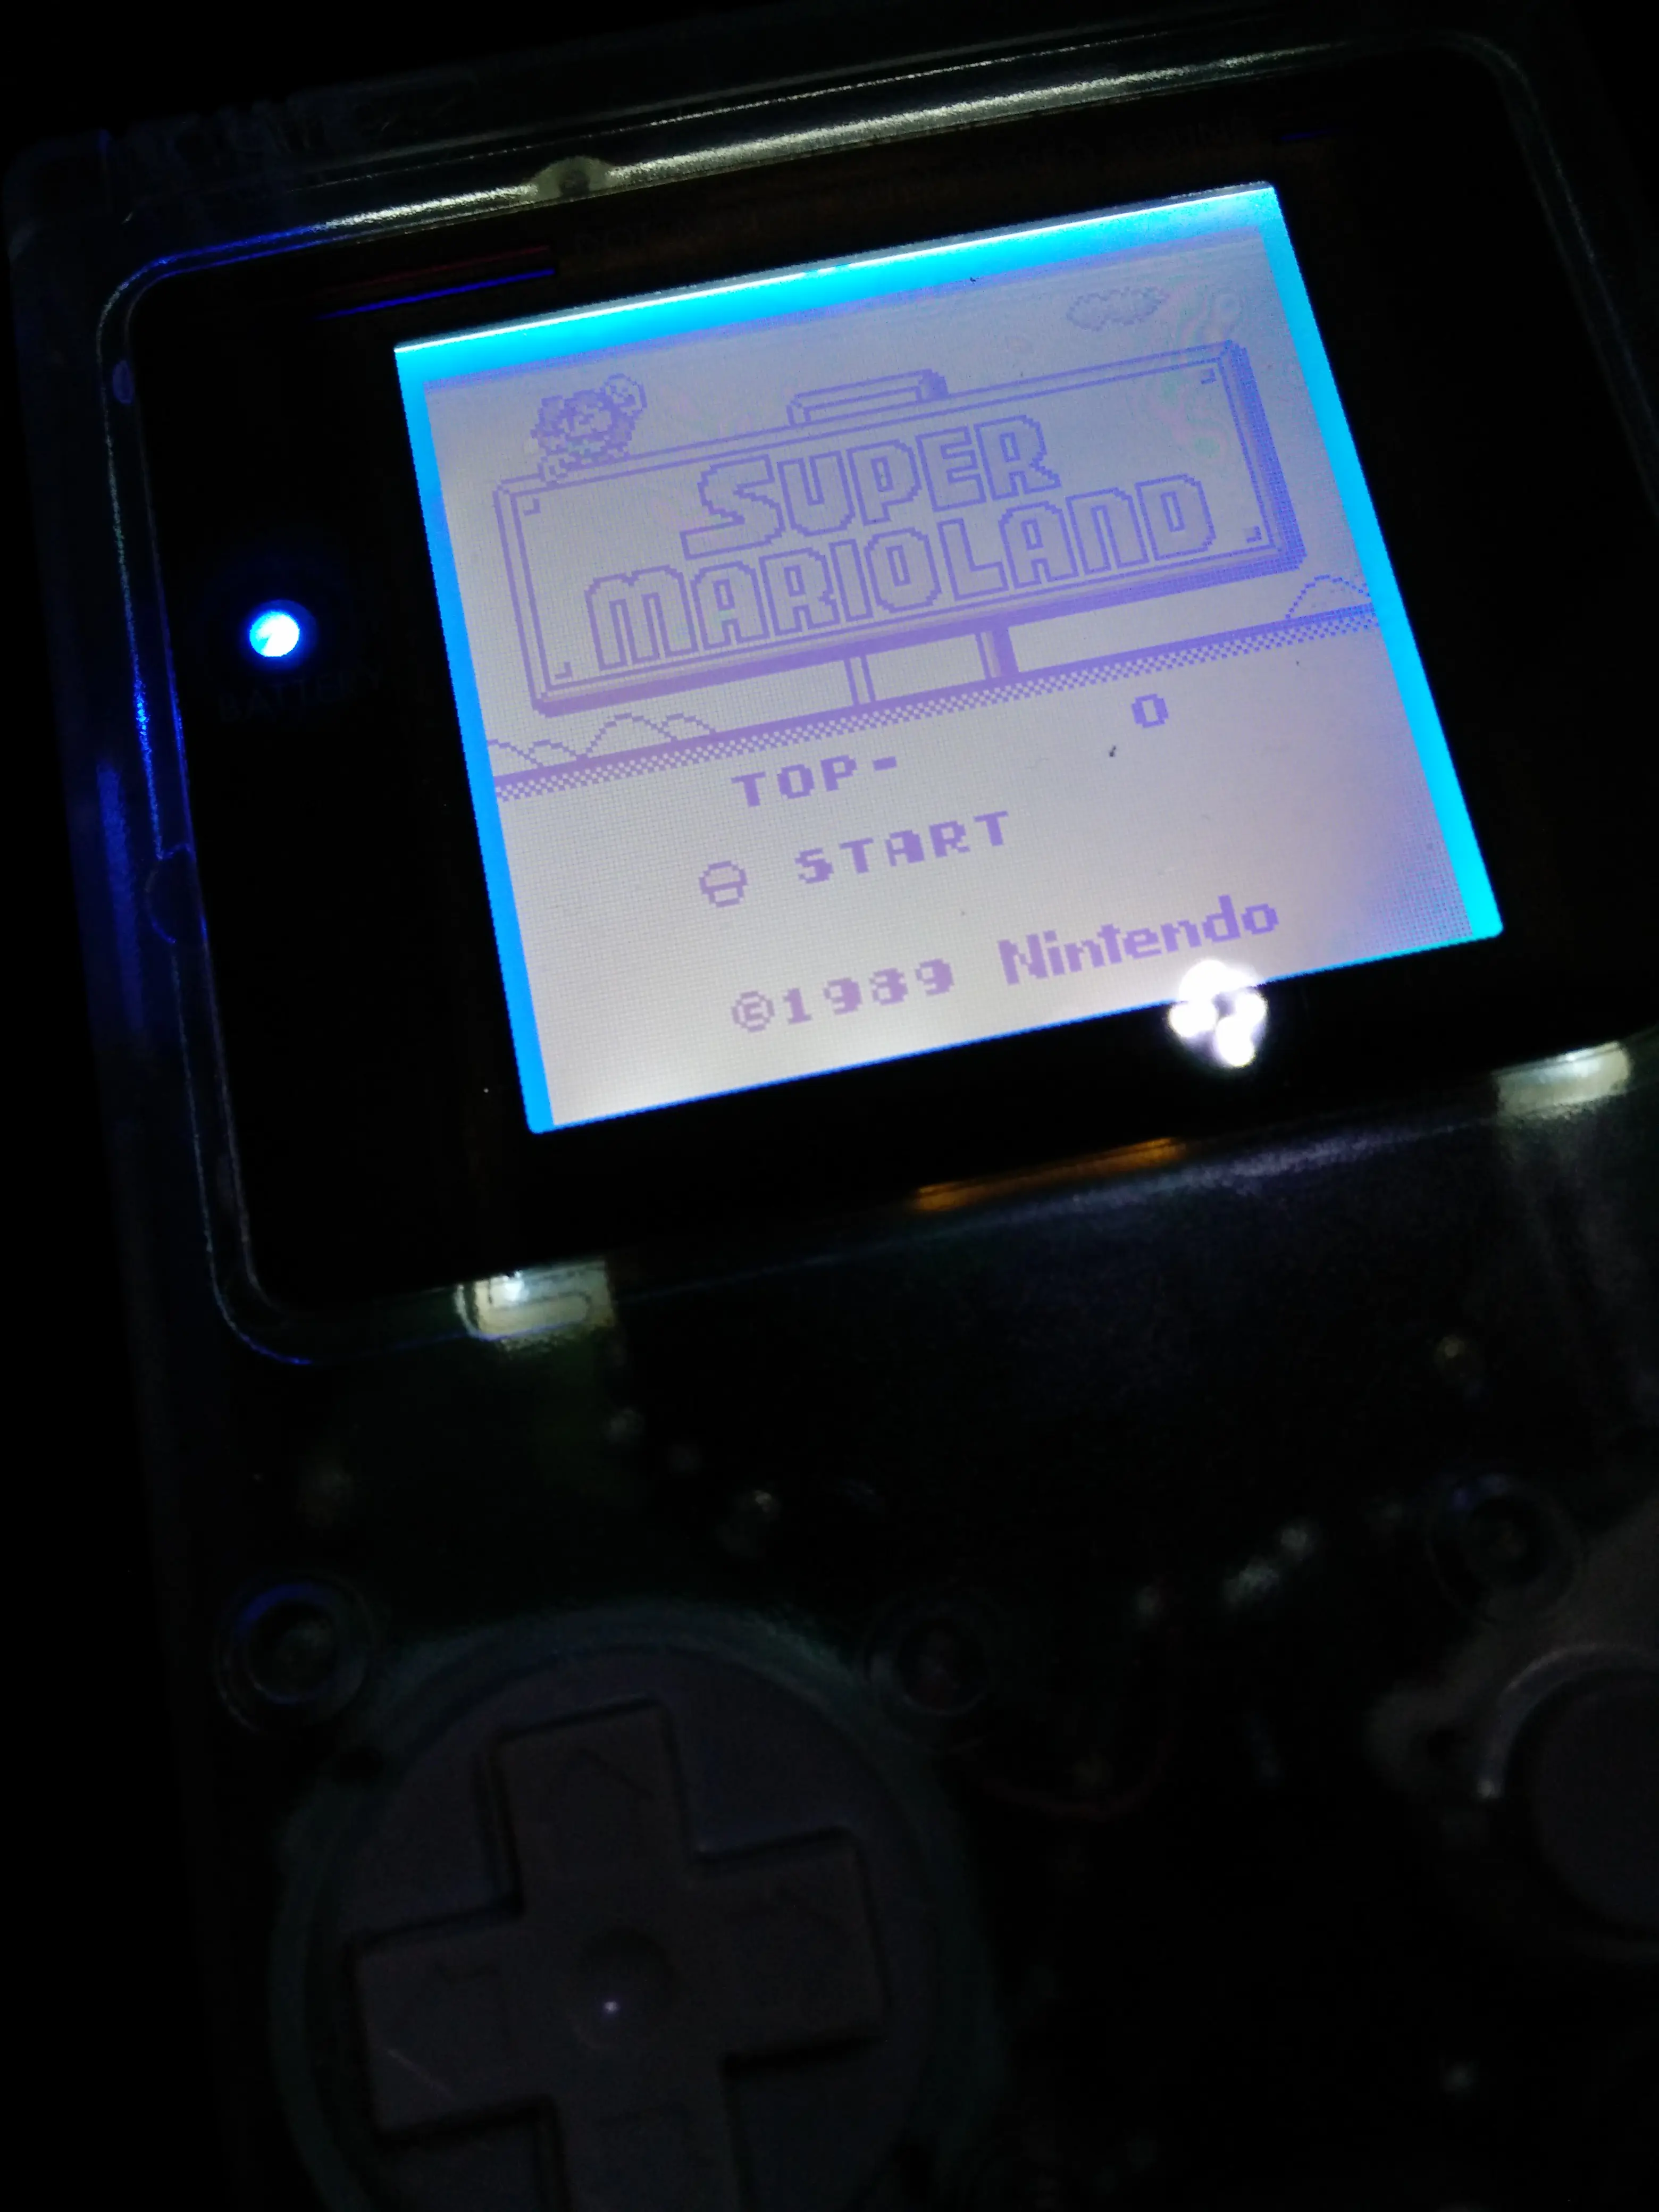 Gameboy DMG-01 Backlight Mod with Bivert Chip Gameboy DMG-01 Backlight Mod with Bivert Chip showing Super Mario Land title screen